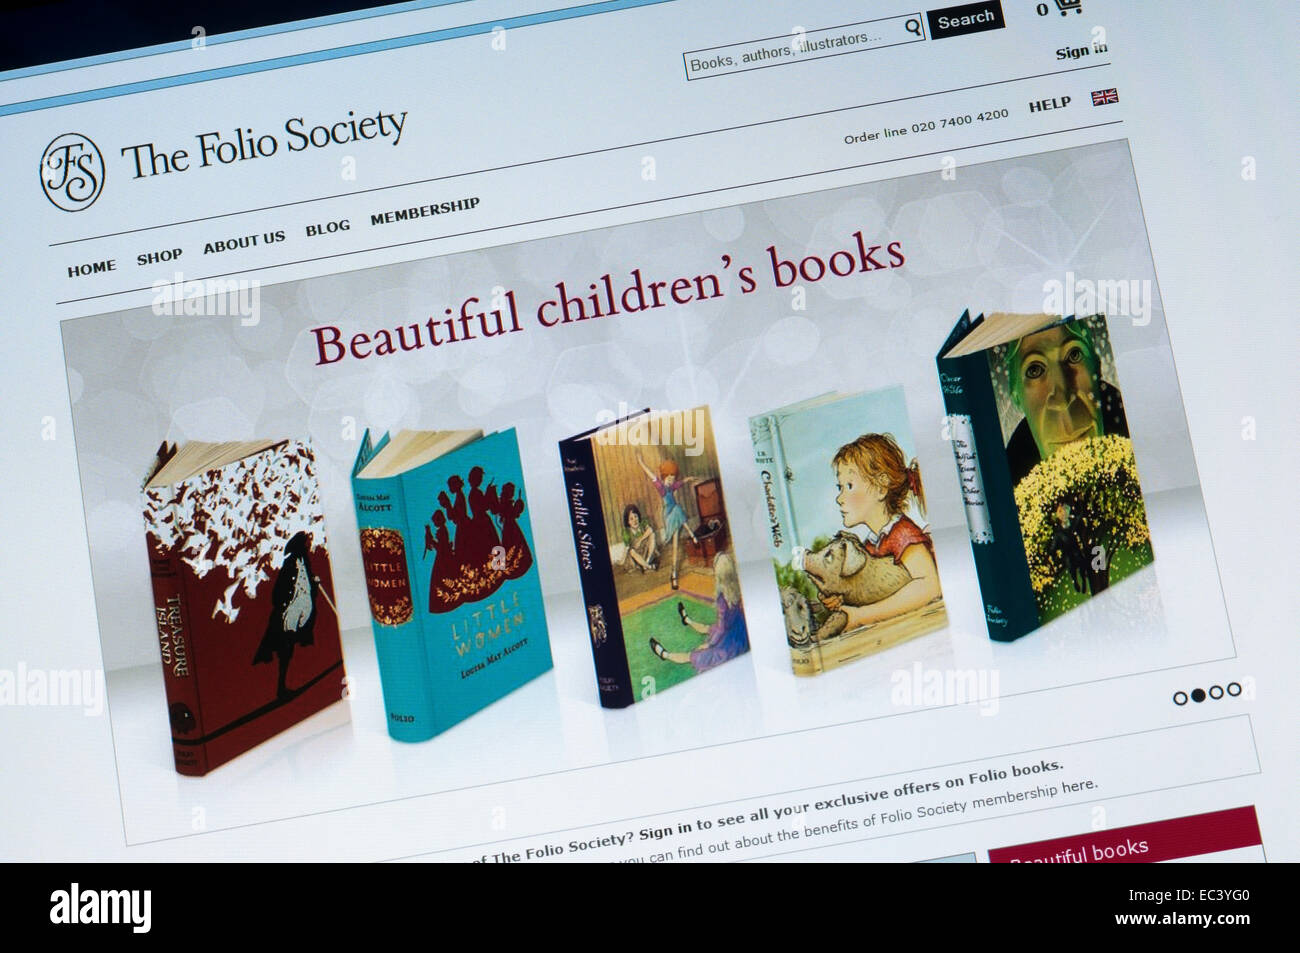 The home page of The Folio Society web site. Stock Photo